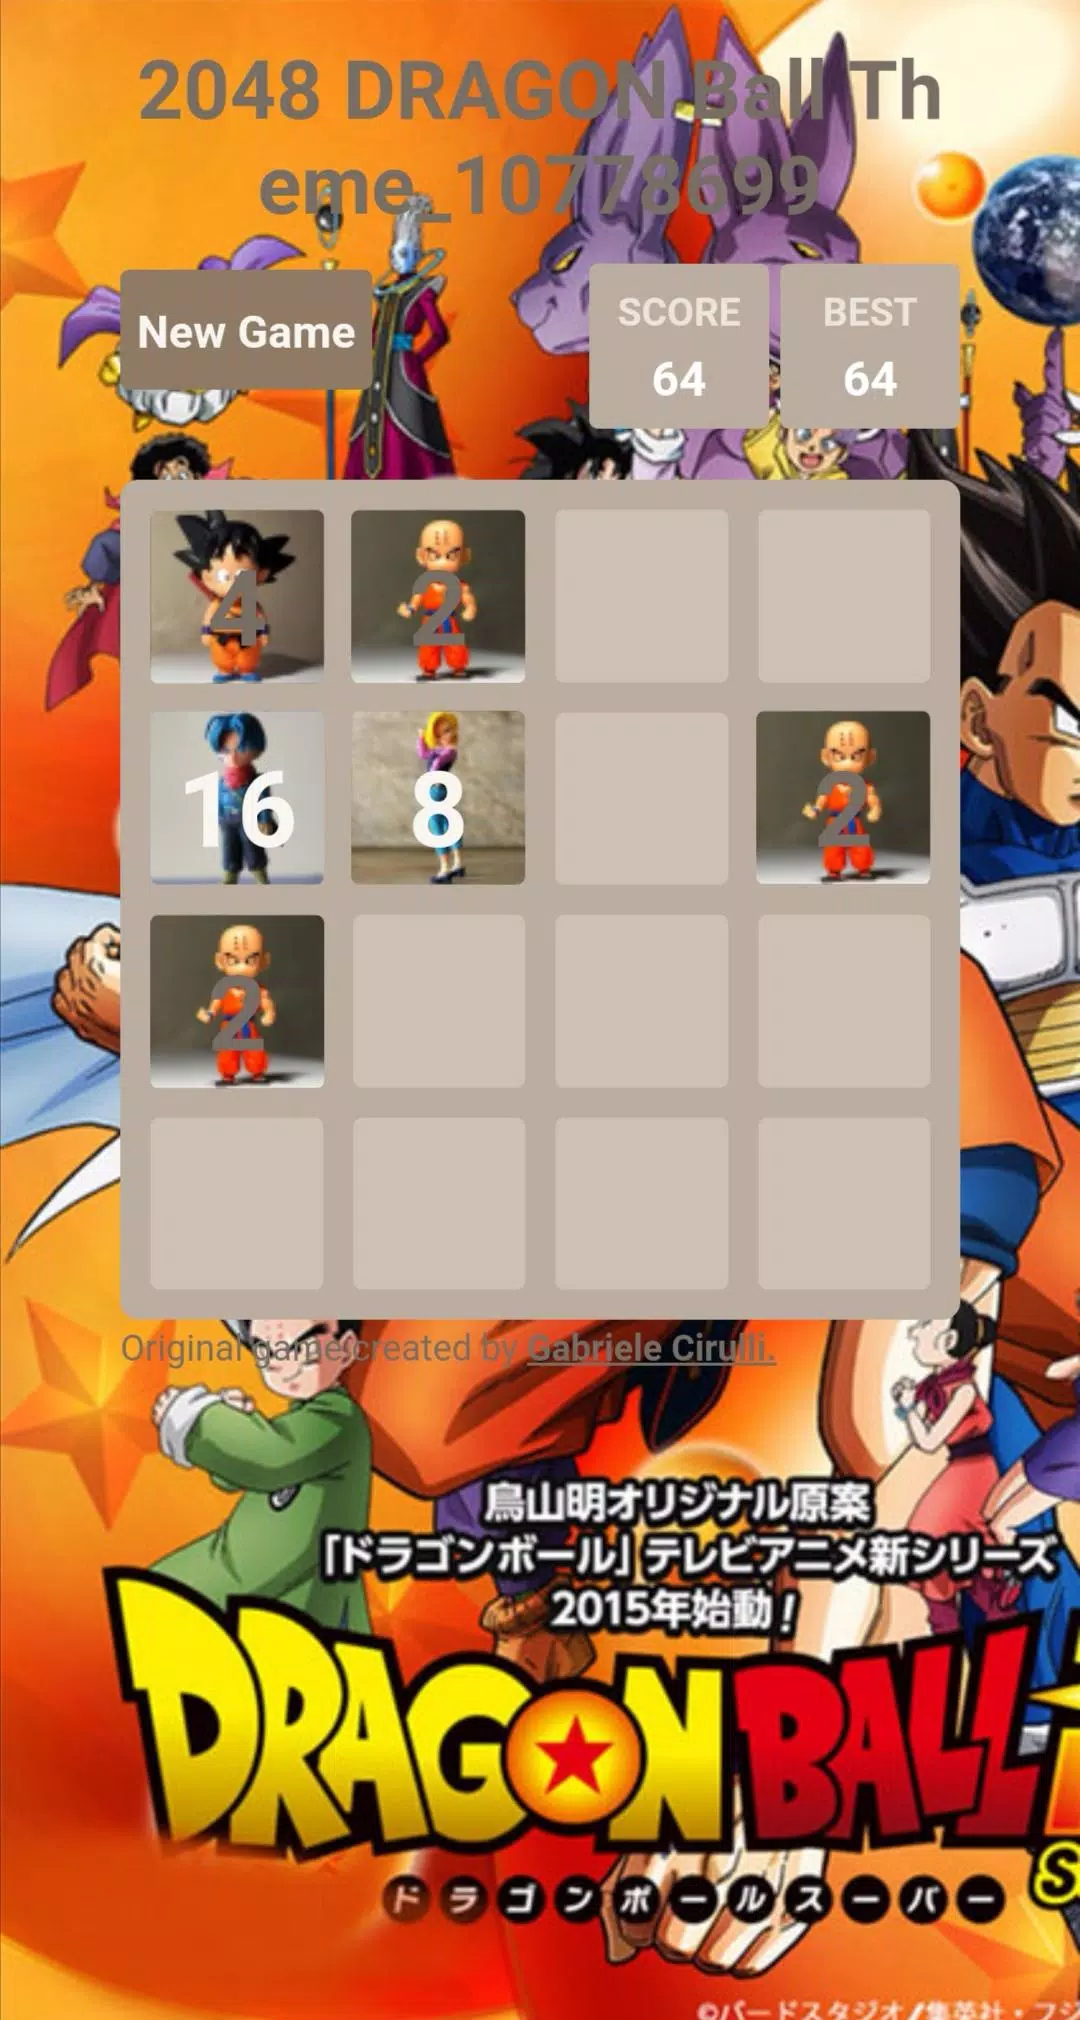 2048 DRAGON BALL THEME APK for Android Download